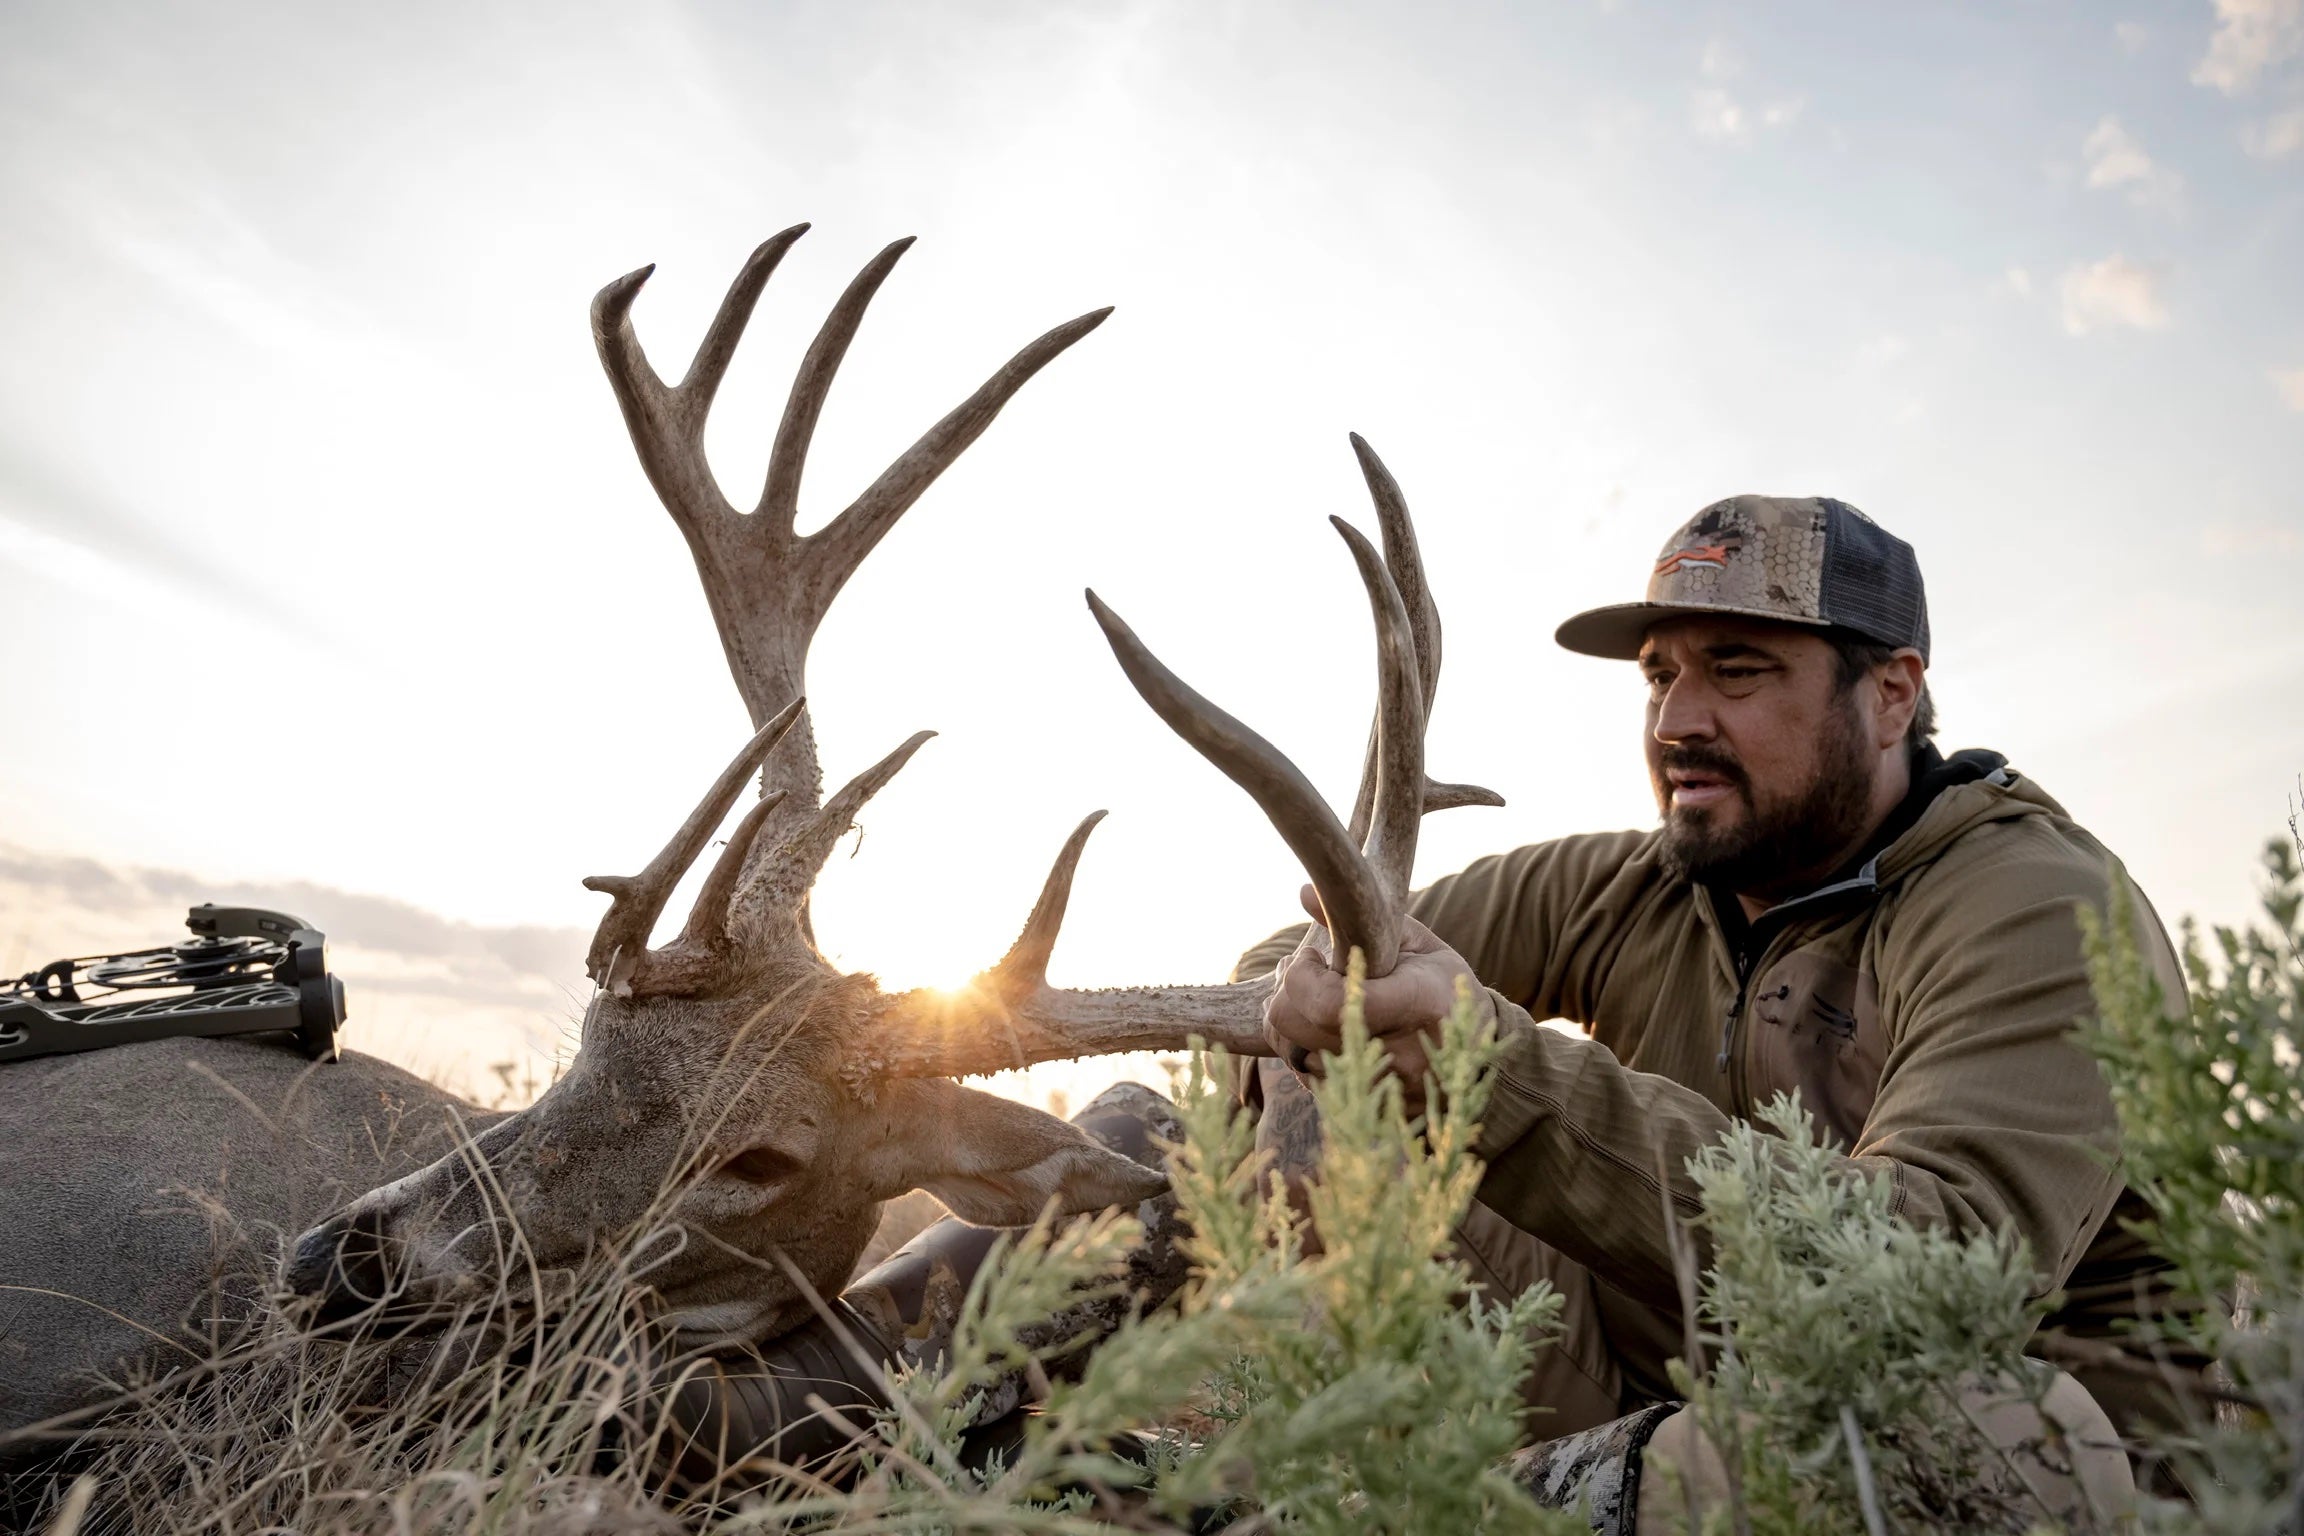 Hunter with whitetail deer shows that Kansas is one of the best deer hunting states